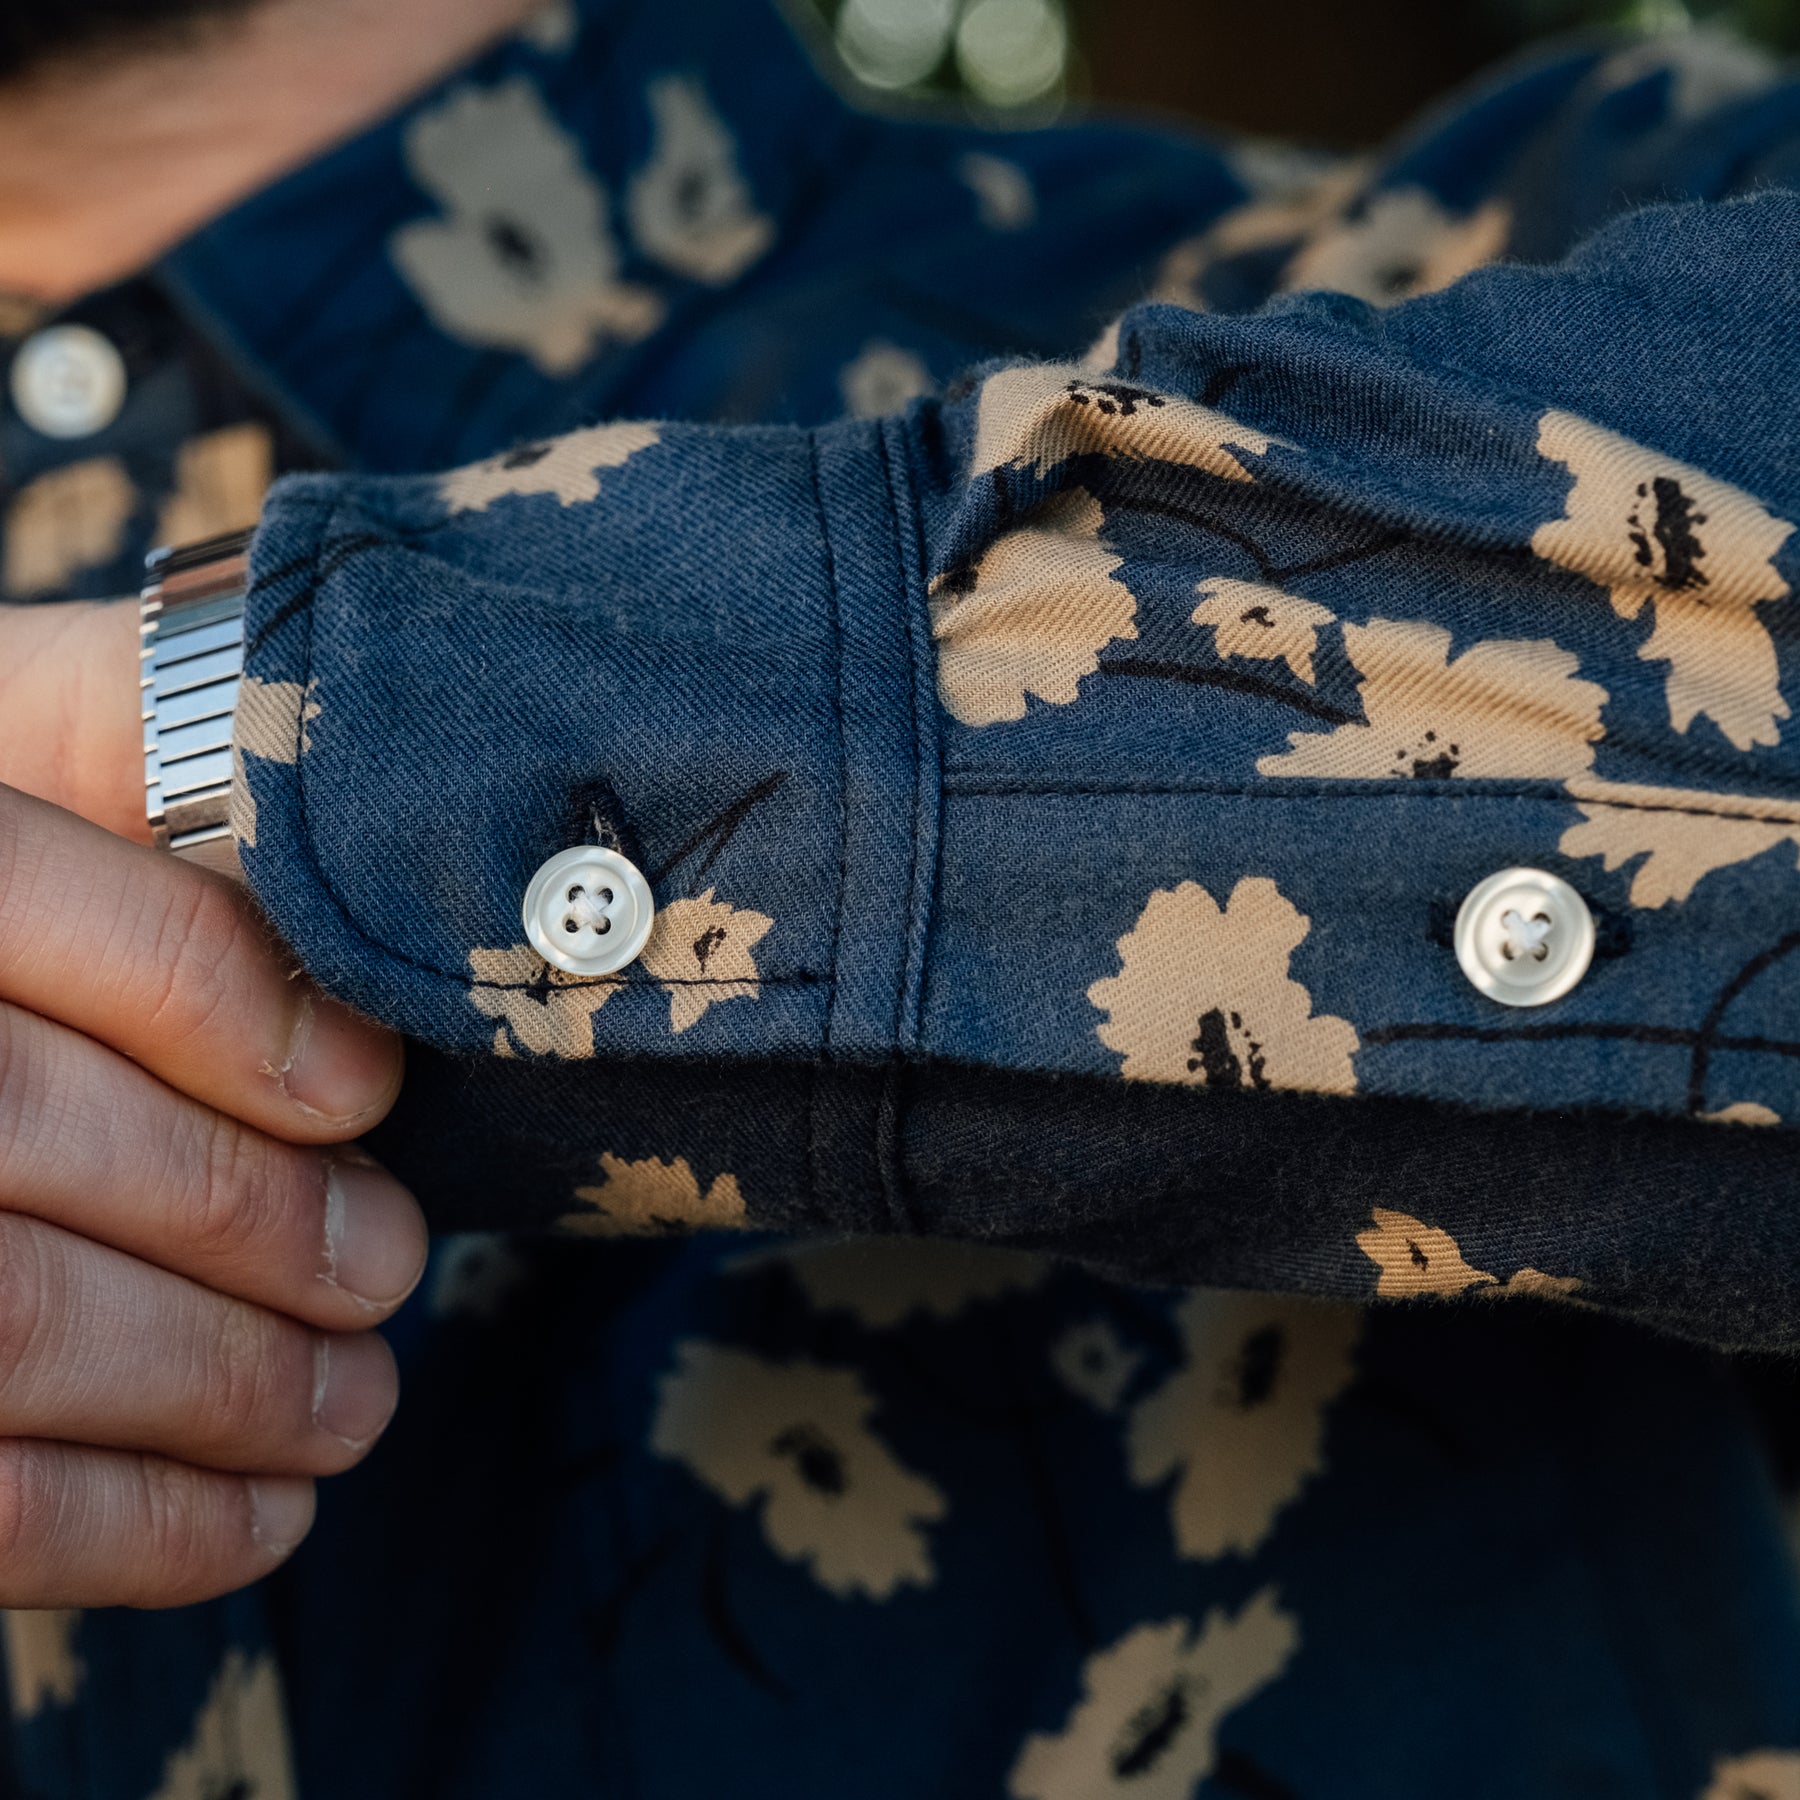 Rogue Territory Oxford Shirt Blue Floral